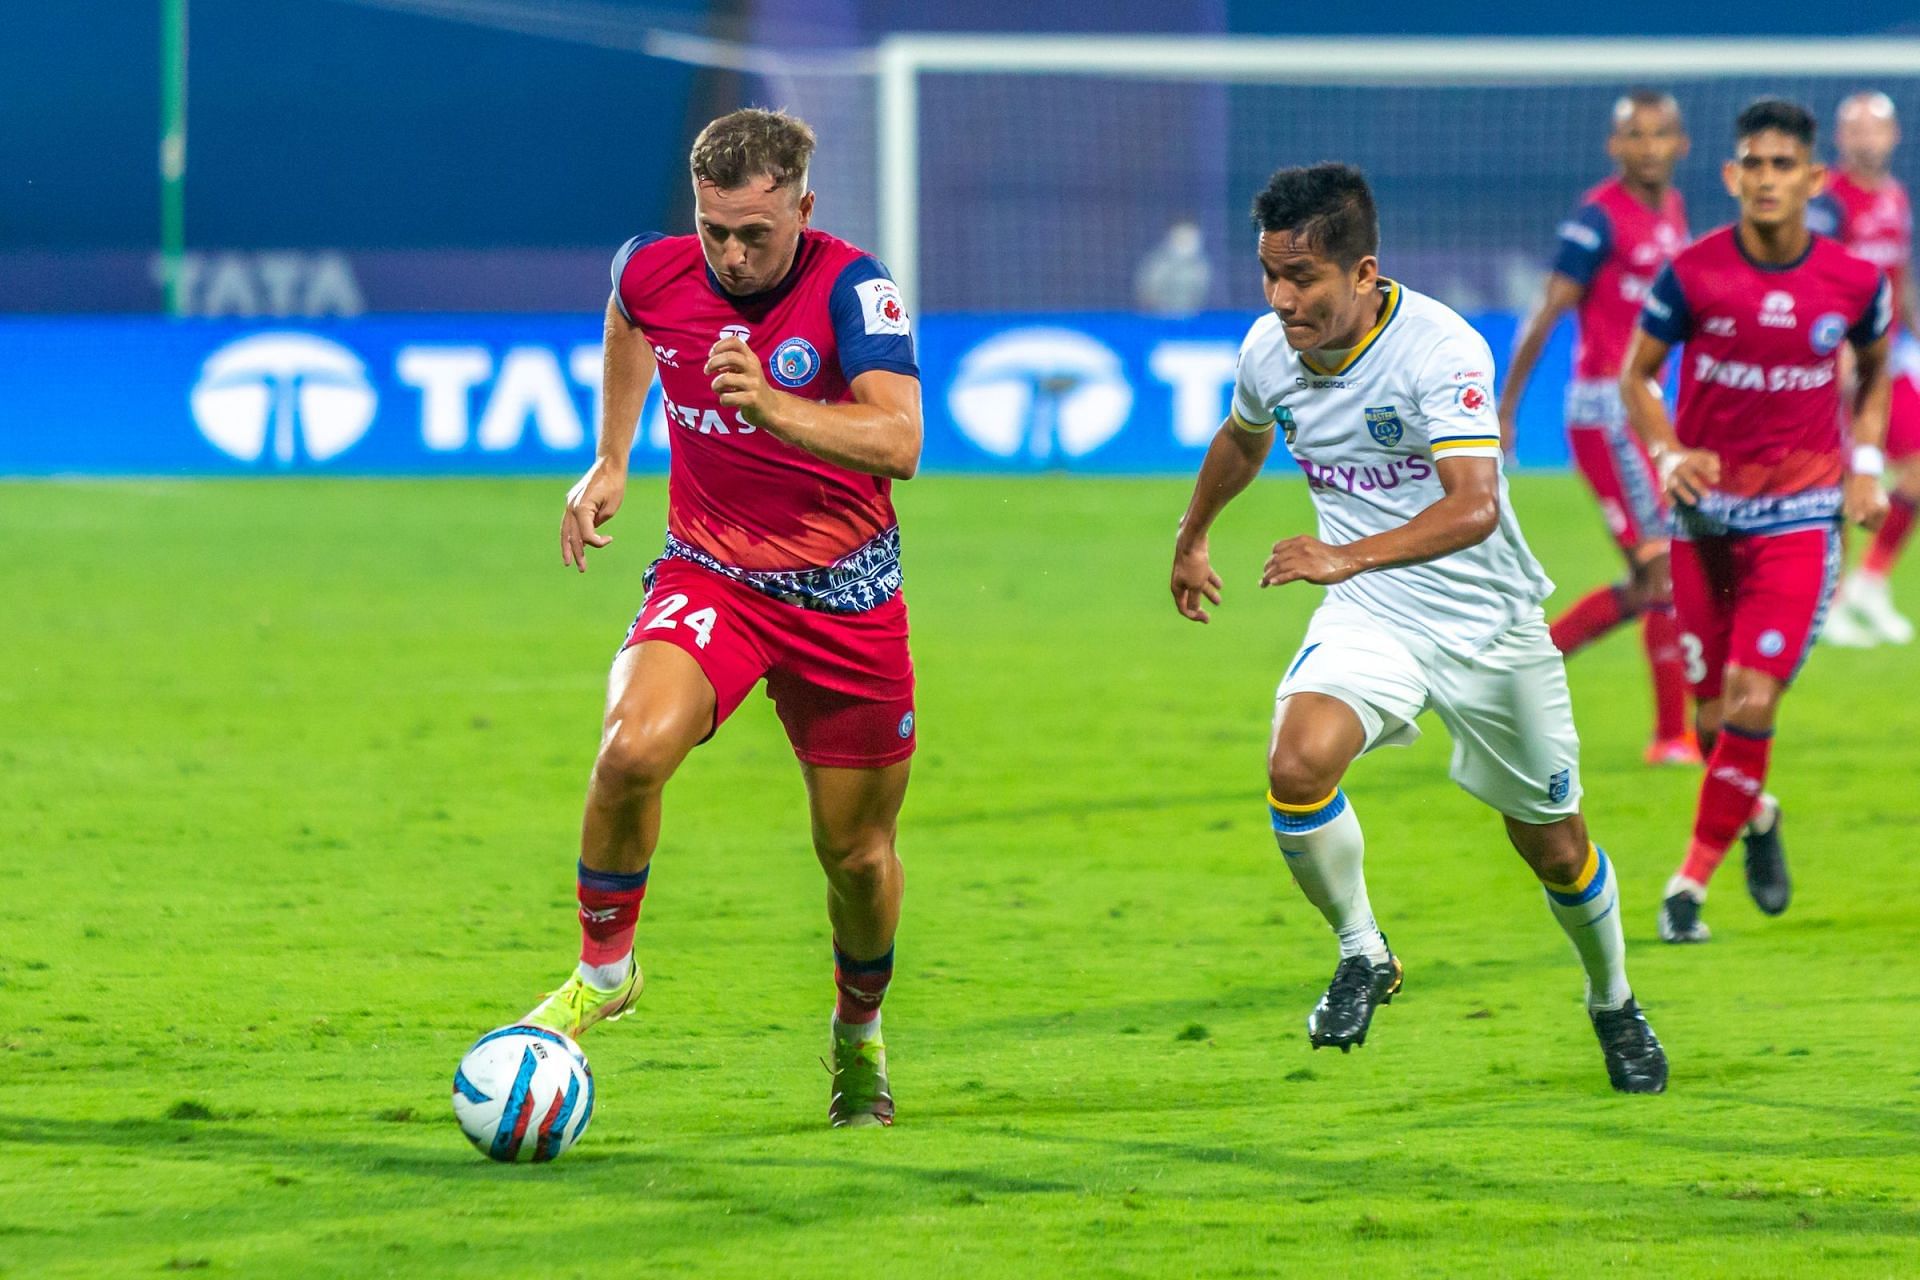 KBFC vs JFC: Kerala Blasters aim to reach their third ISL finals, Jamshedpur FC ready to turn around from the last defeat